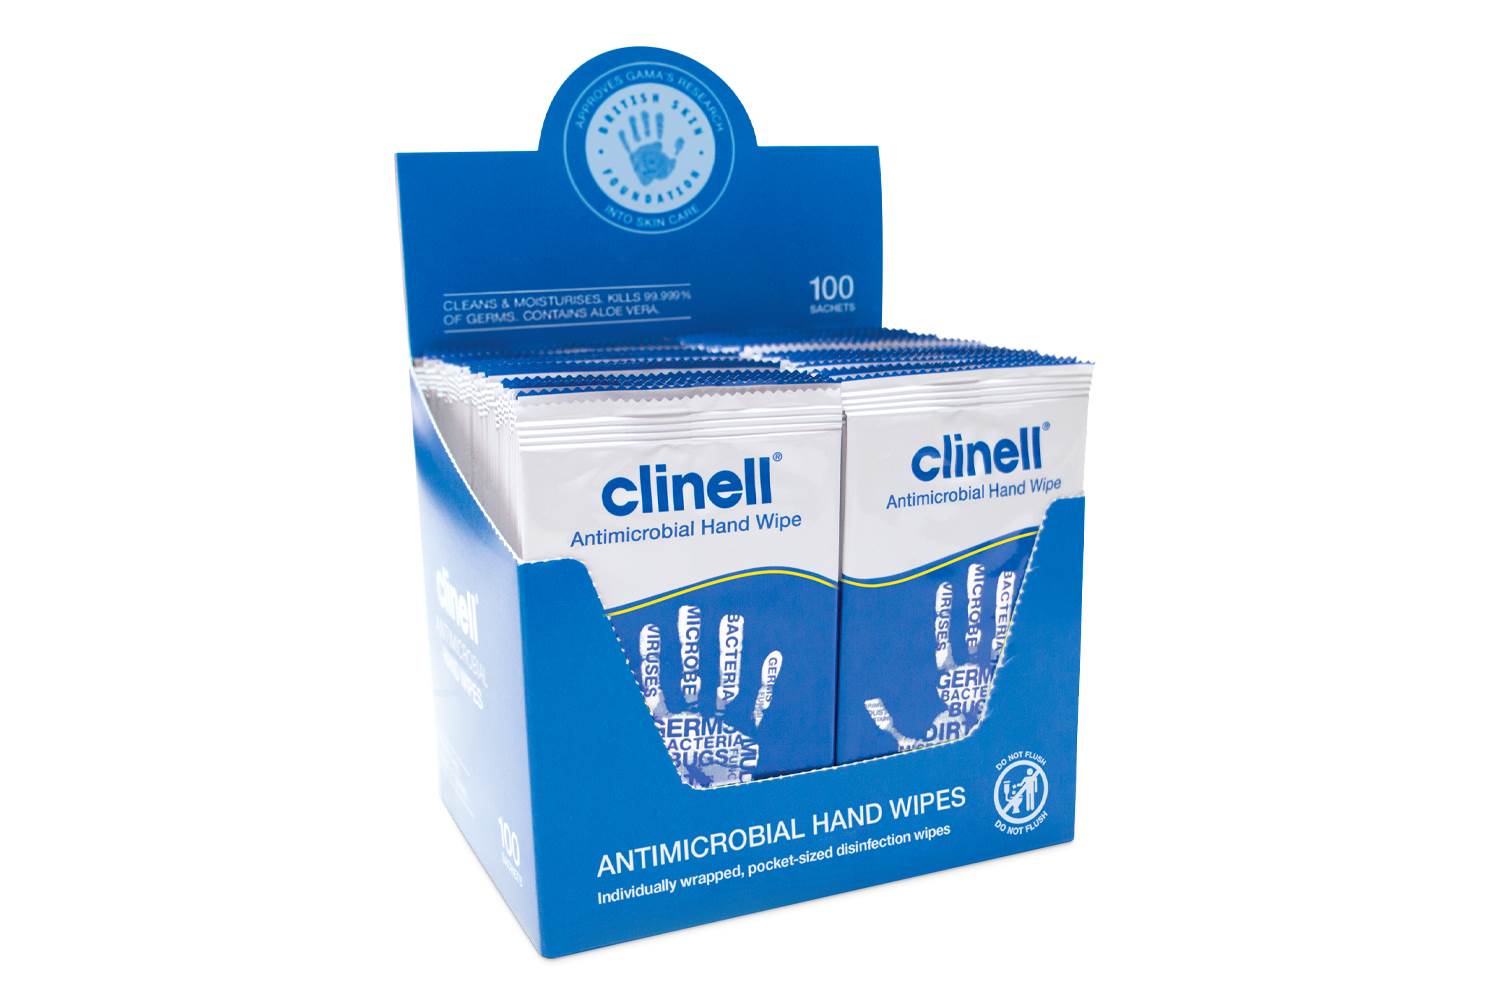 Clinell Antibactericidal Hand Wipes, 100 individually wrapped